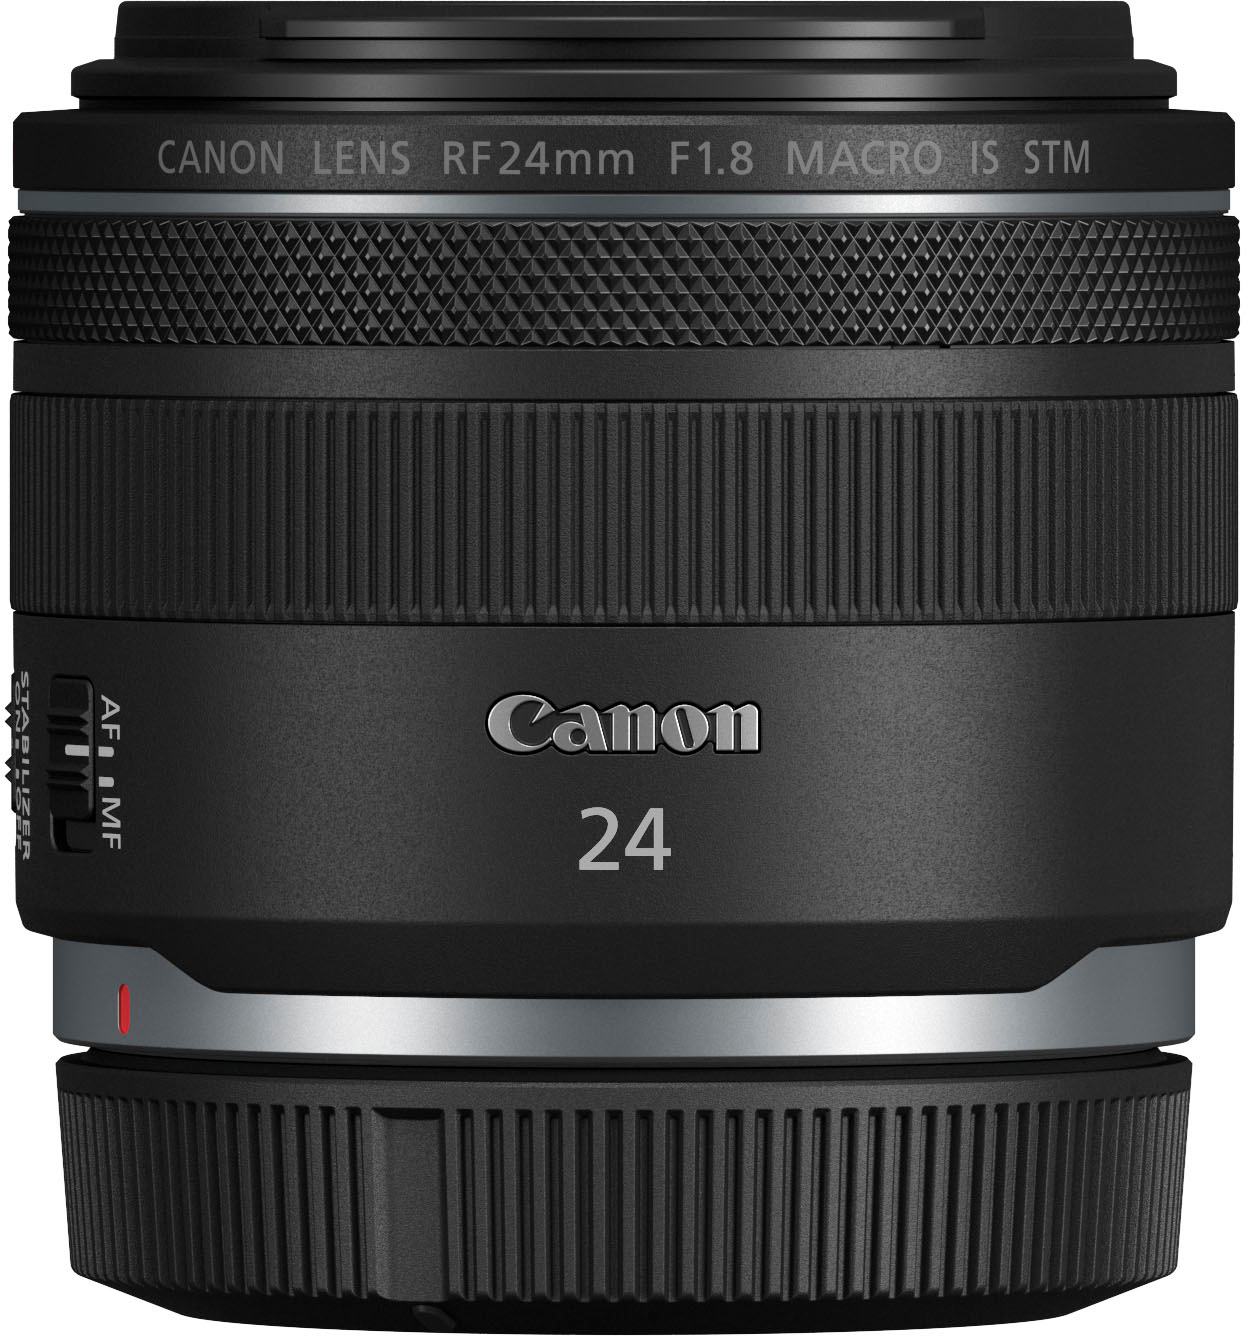 Angle View: Canon - RF 24mm F1.8 MACRO IS STM Wide Angle Prime Lens for EOS R-Series Cameras - Black